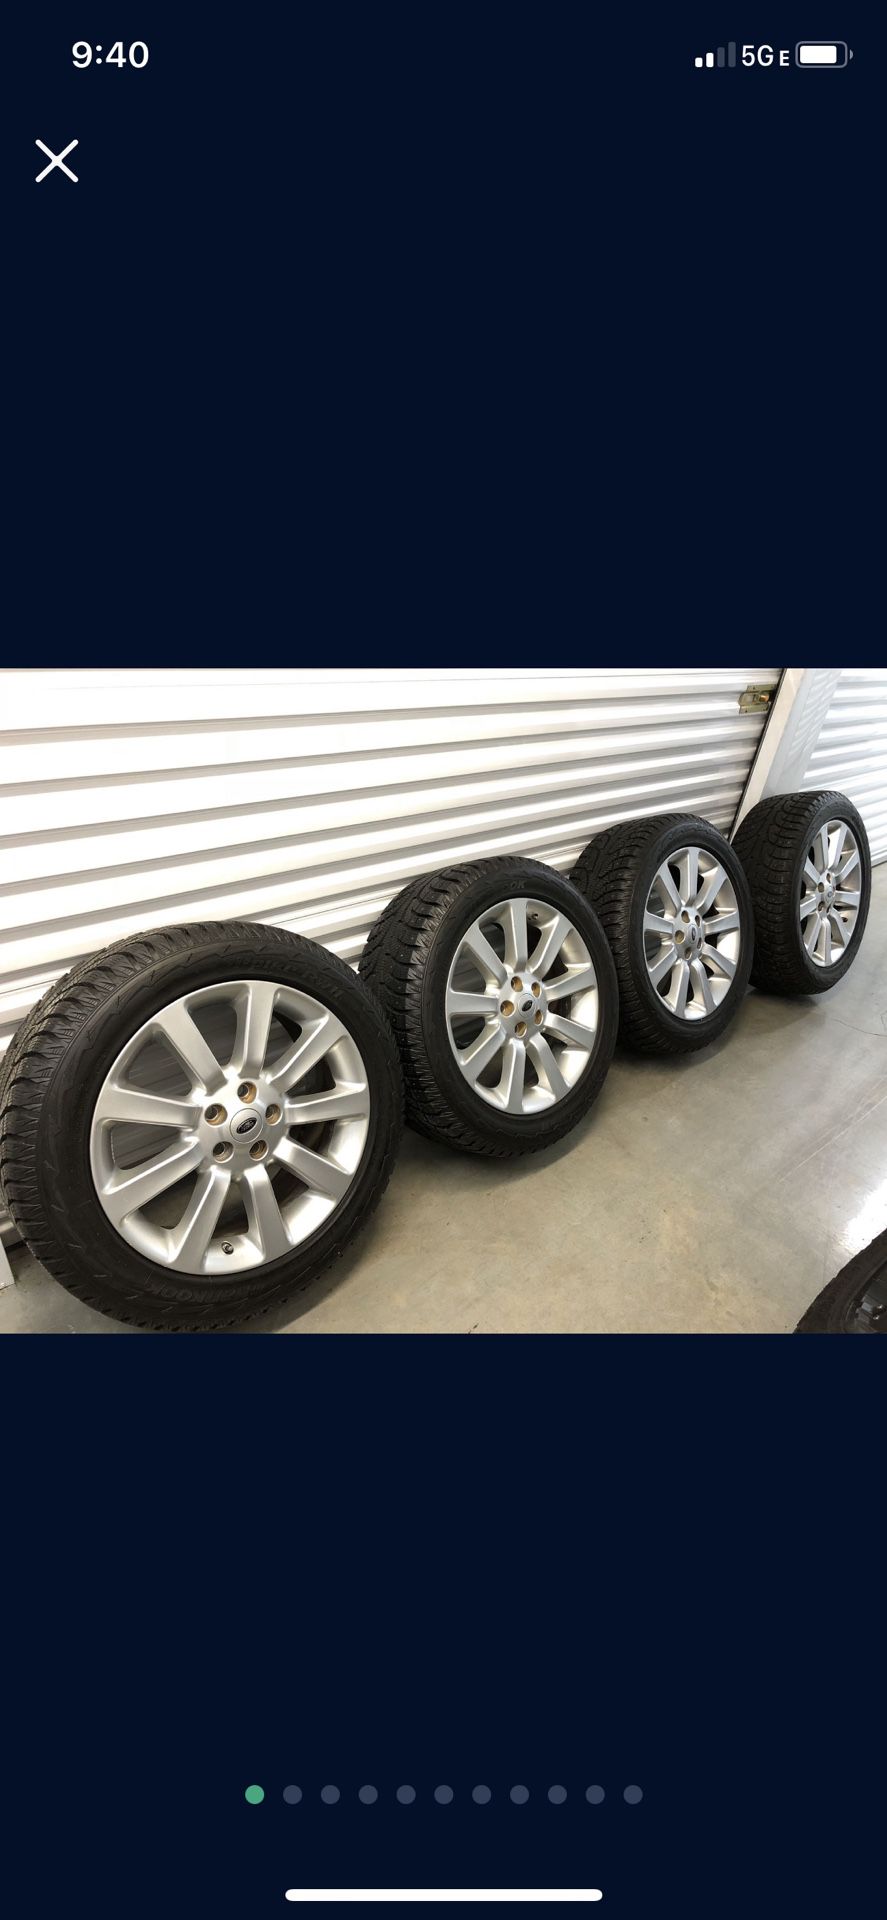 OEM Land Rover Wheels With Snow Tires